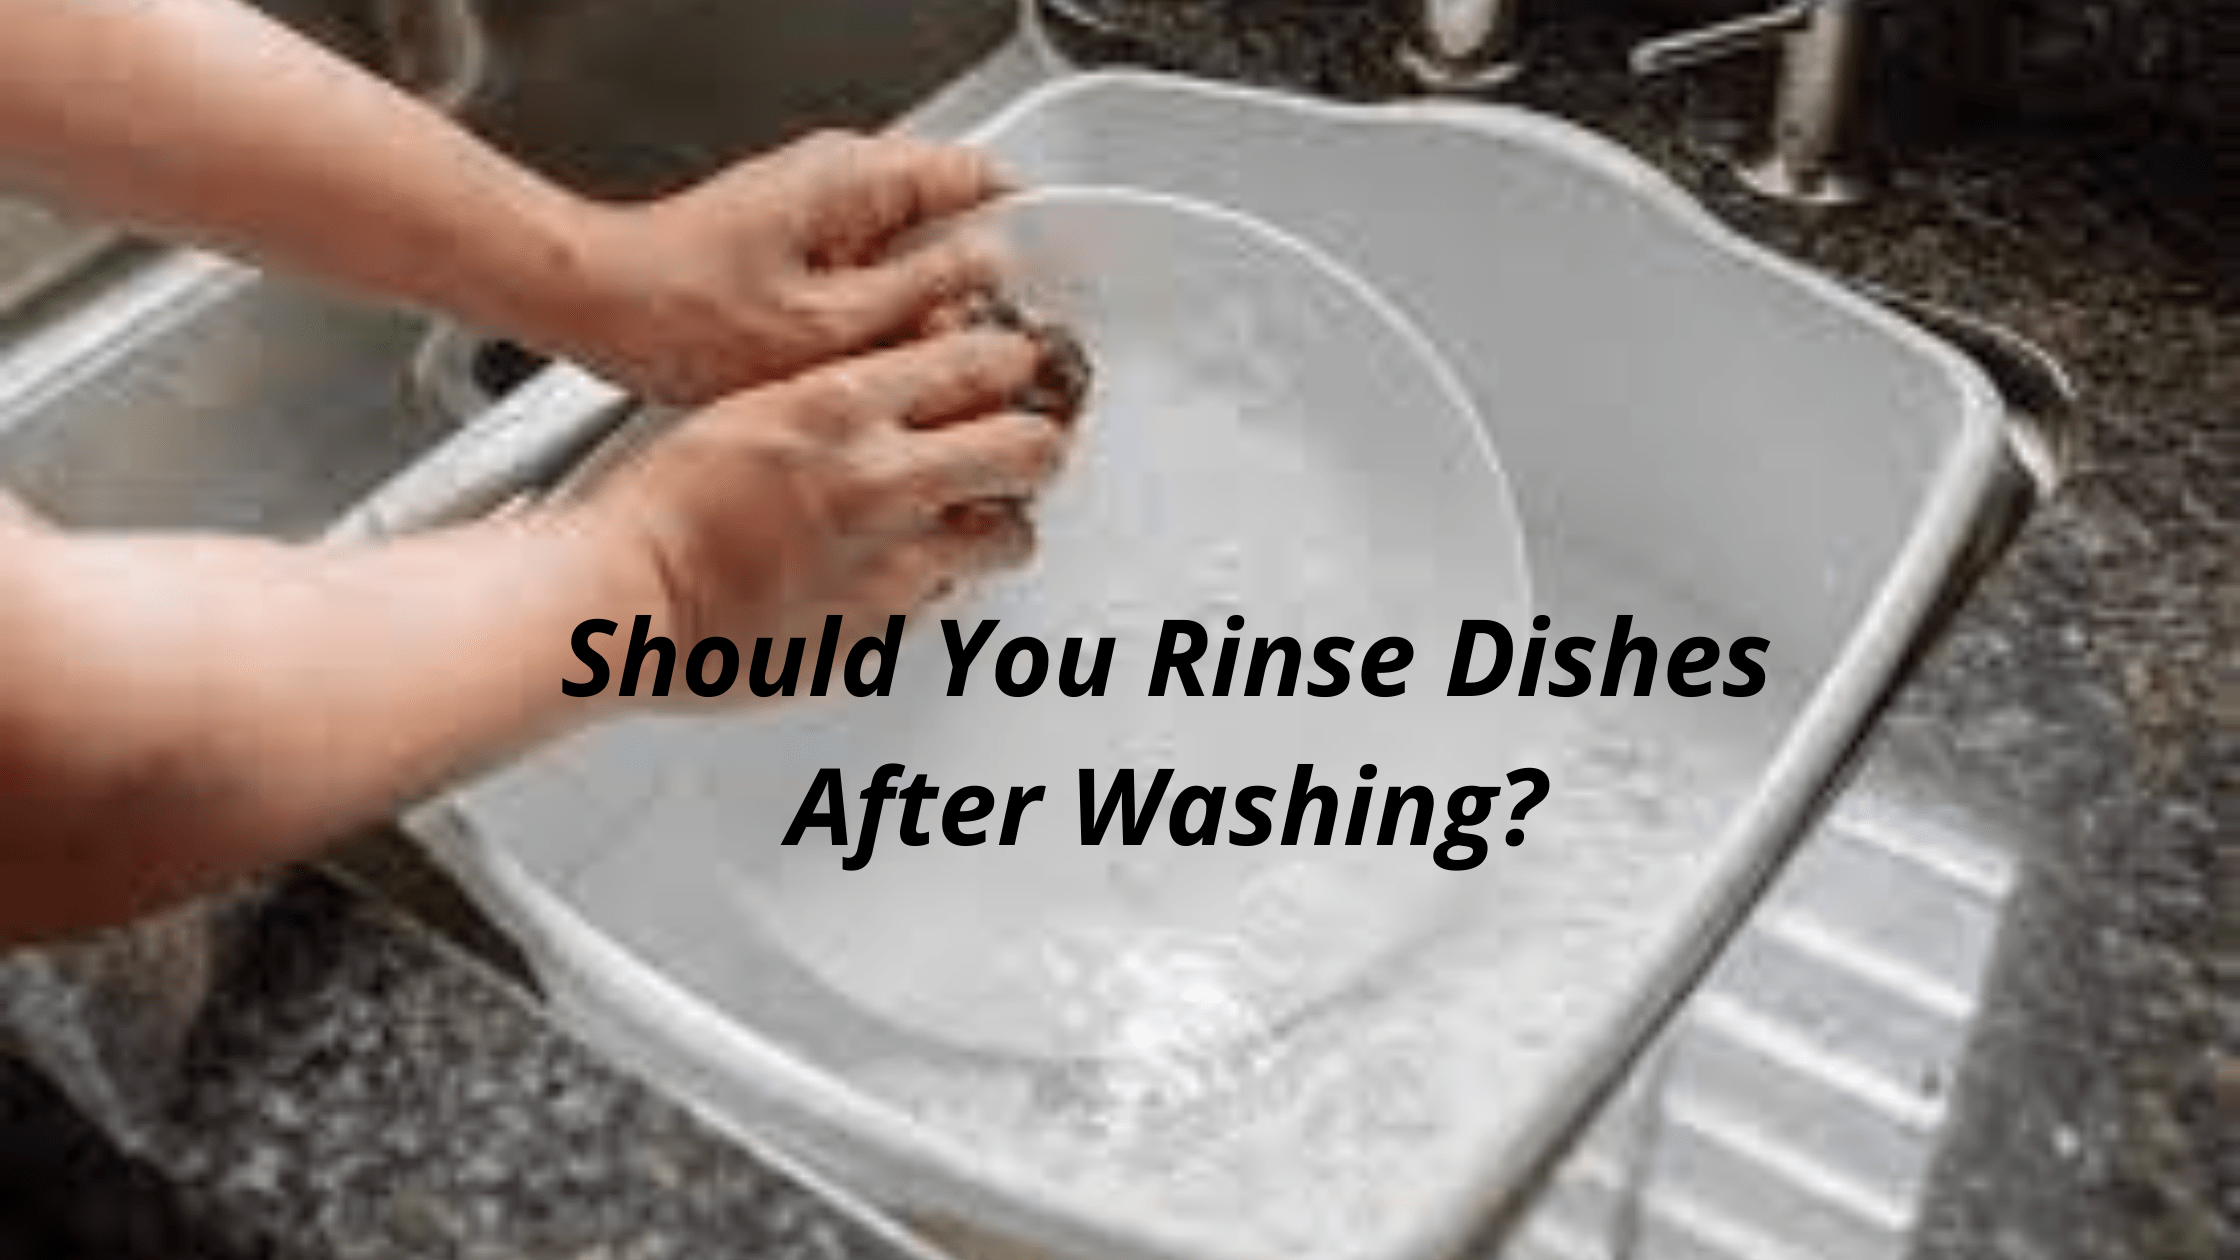 Should You Rinse Dishes After Washing?